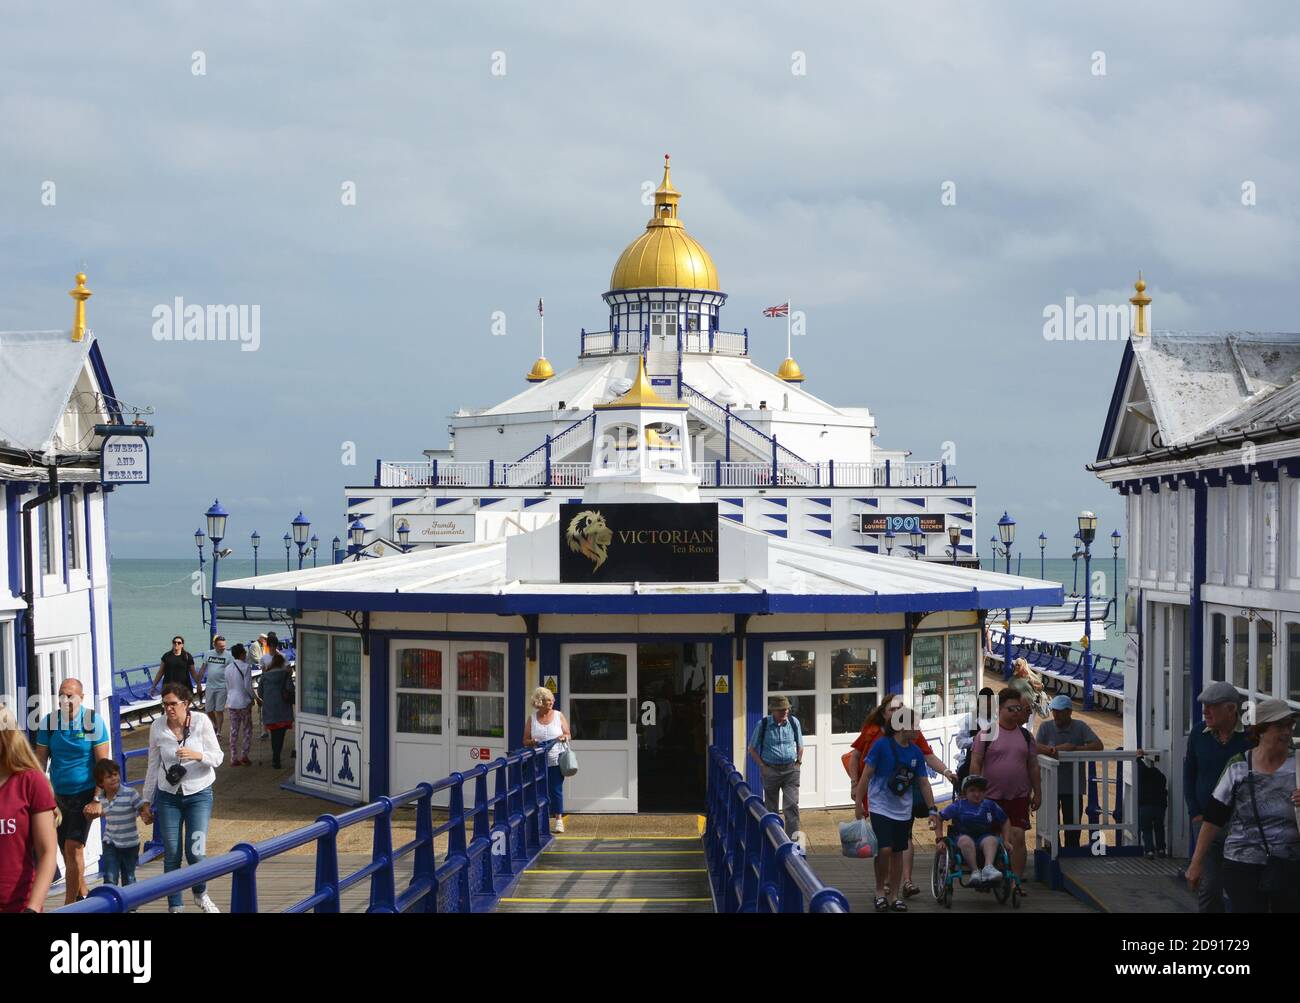 EASTBOURNE, UK - AUGUST 28, 2019: View down Eastbourne pier with tourists walking around the Victorian tea room in the centre of the deck on August 28 Stock Photo